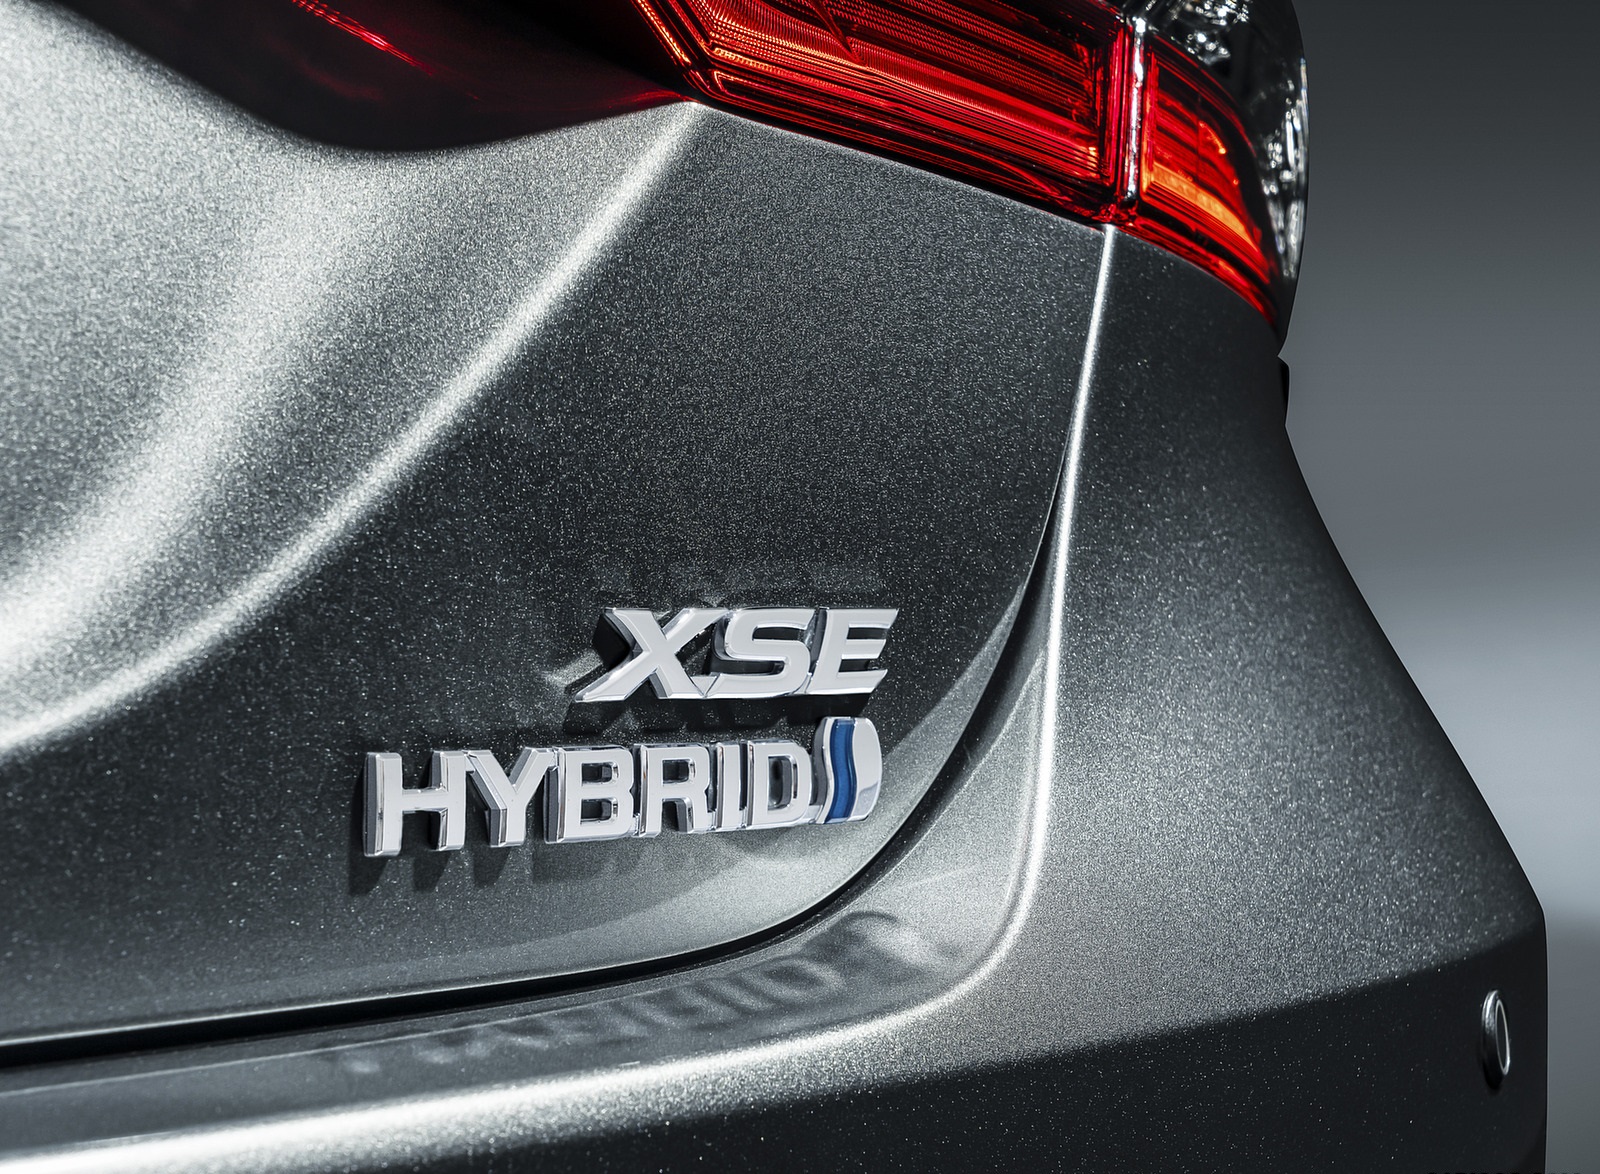 2021 Toyota Camry XSE Hybrid Badge Wallpapers (8)